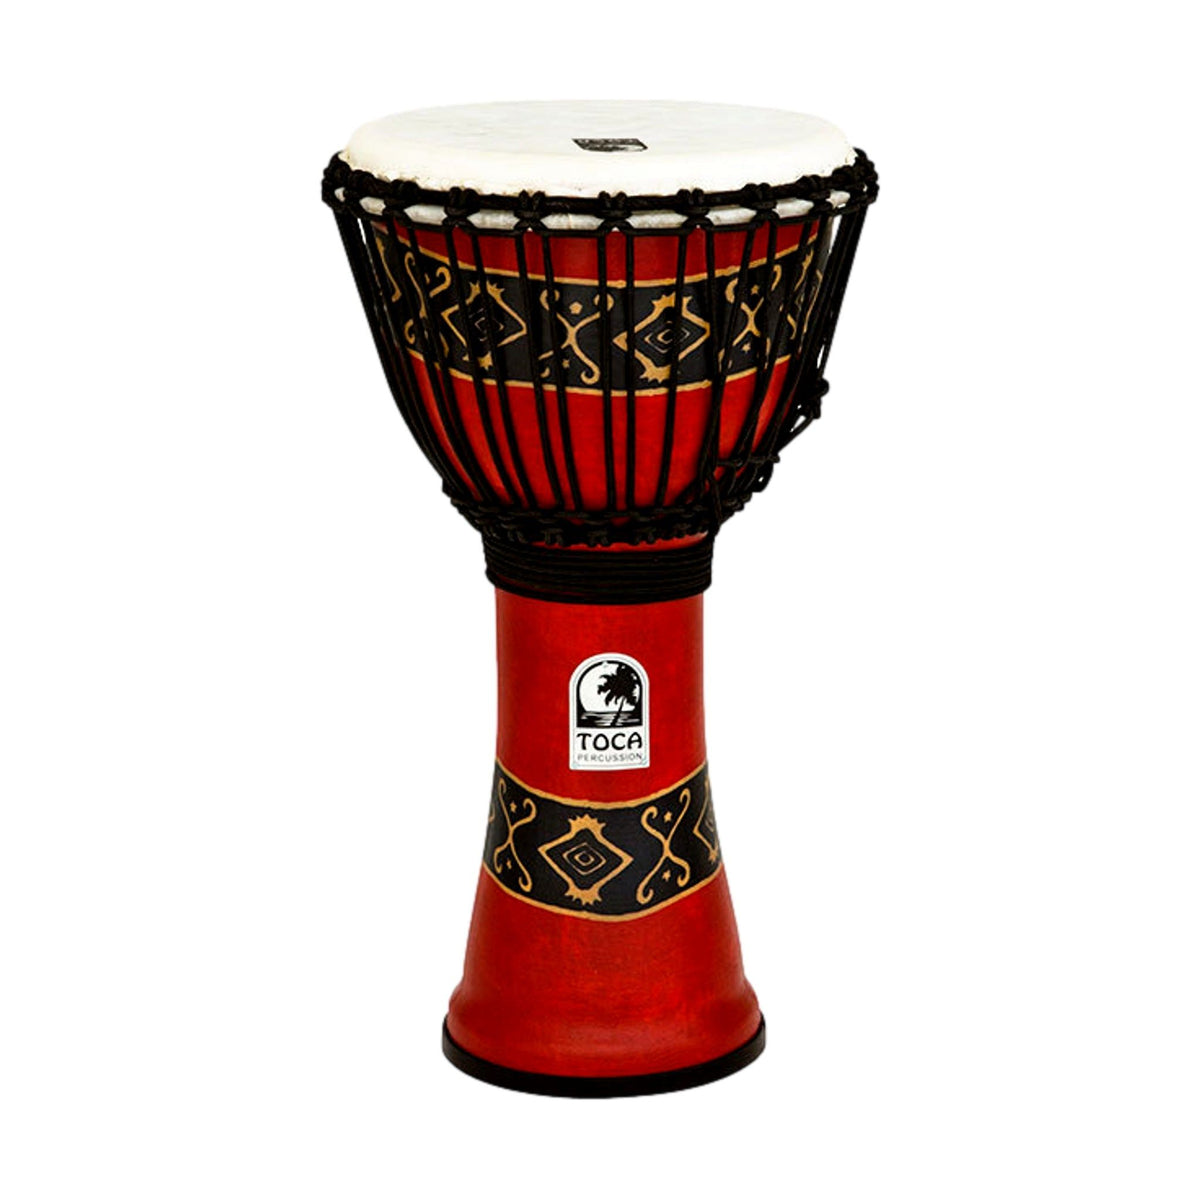 Toca Freestyle 2 Djembe 10in Bali Red